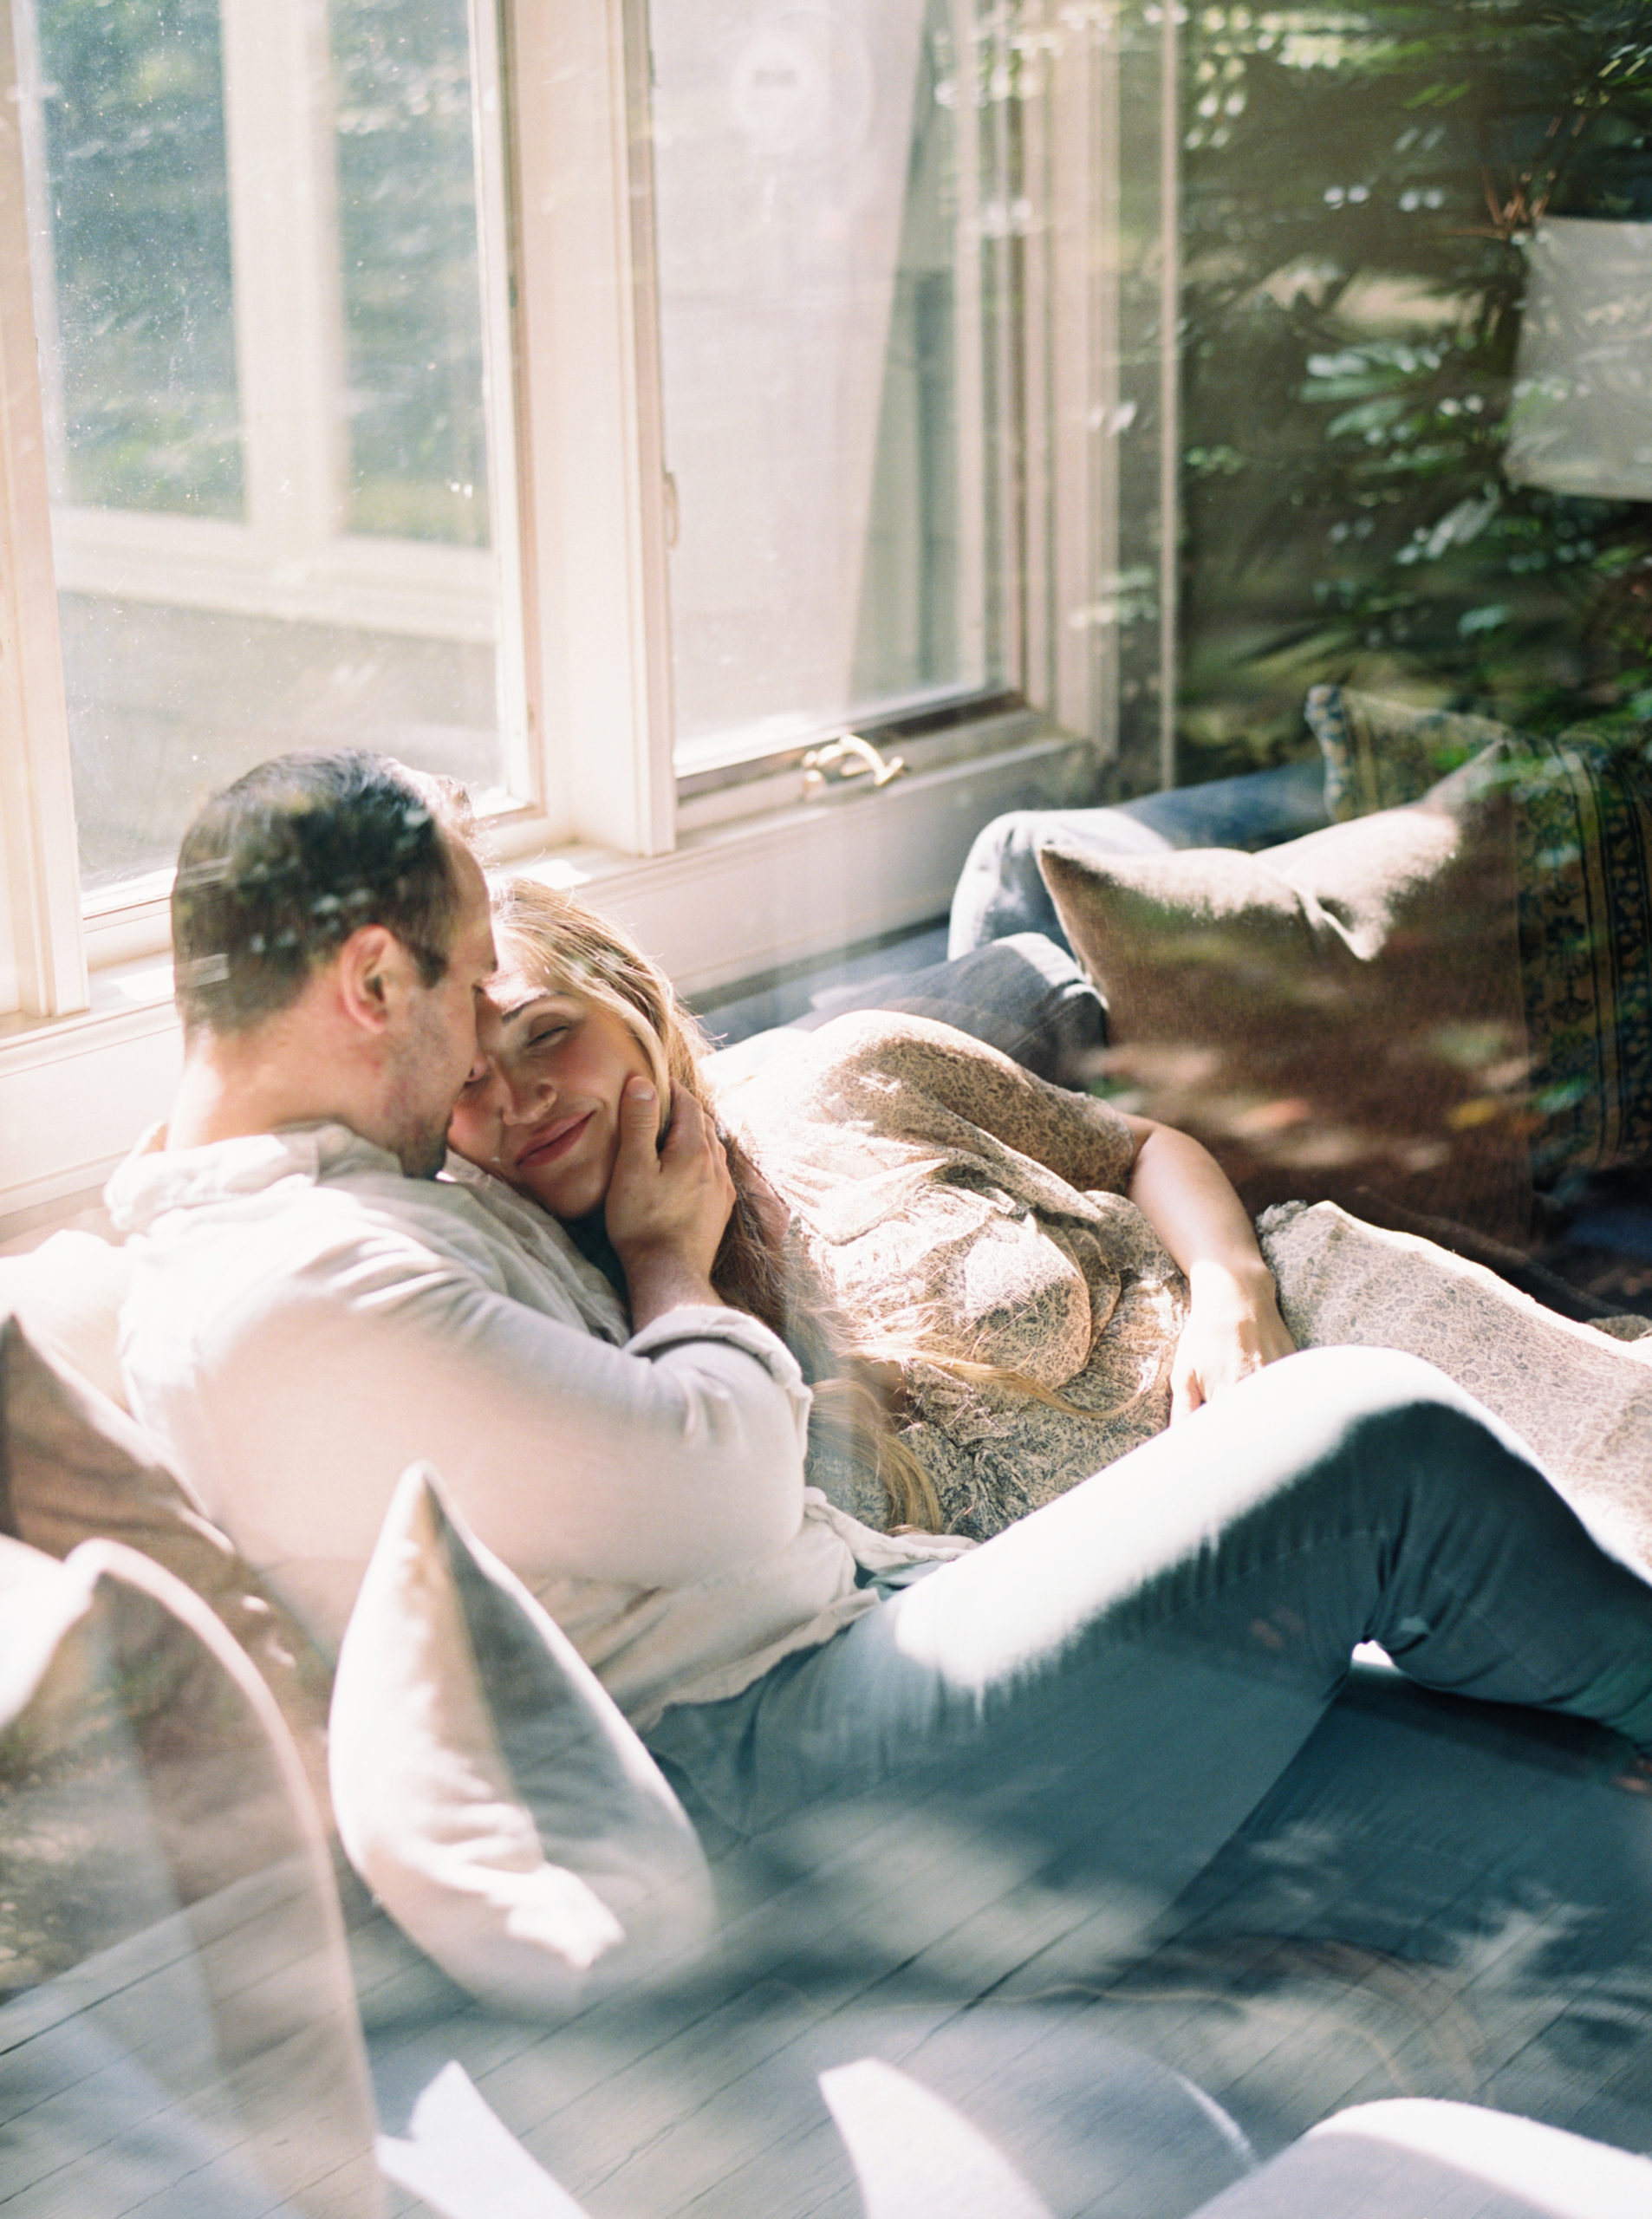 film photographer captures intimate at home couples engagement session | destination film photographer based in Tennessee 